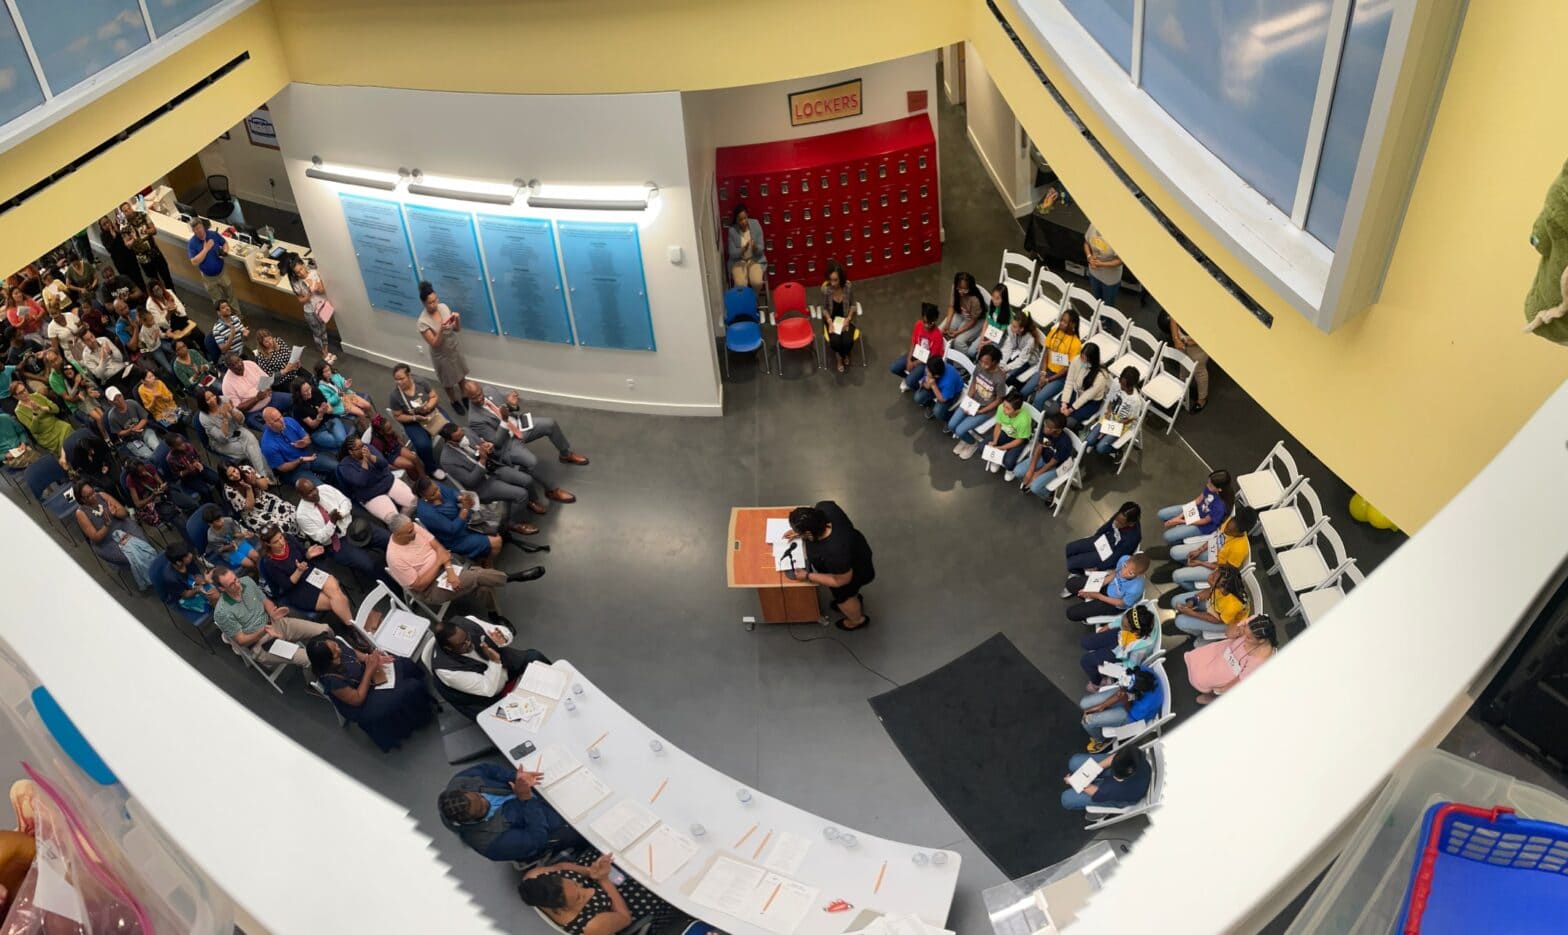 A spelling bee being held inside the Knock Knock Museum